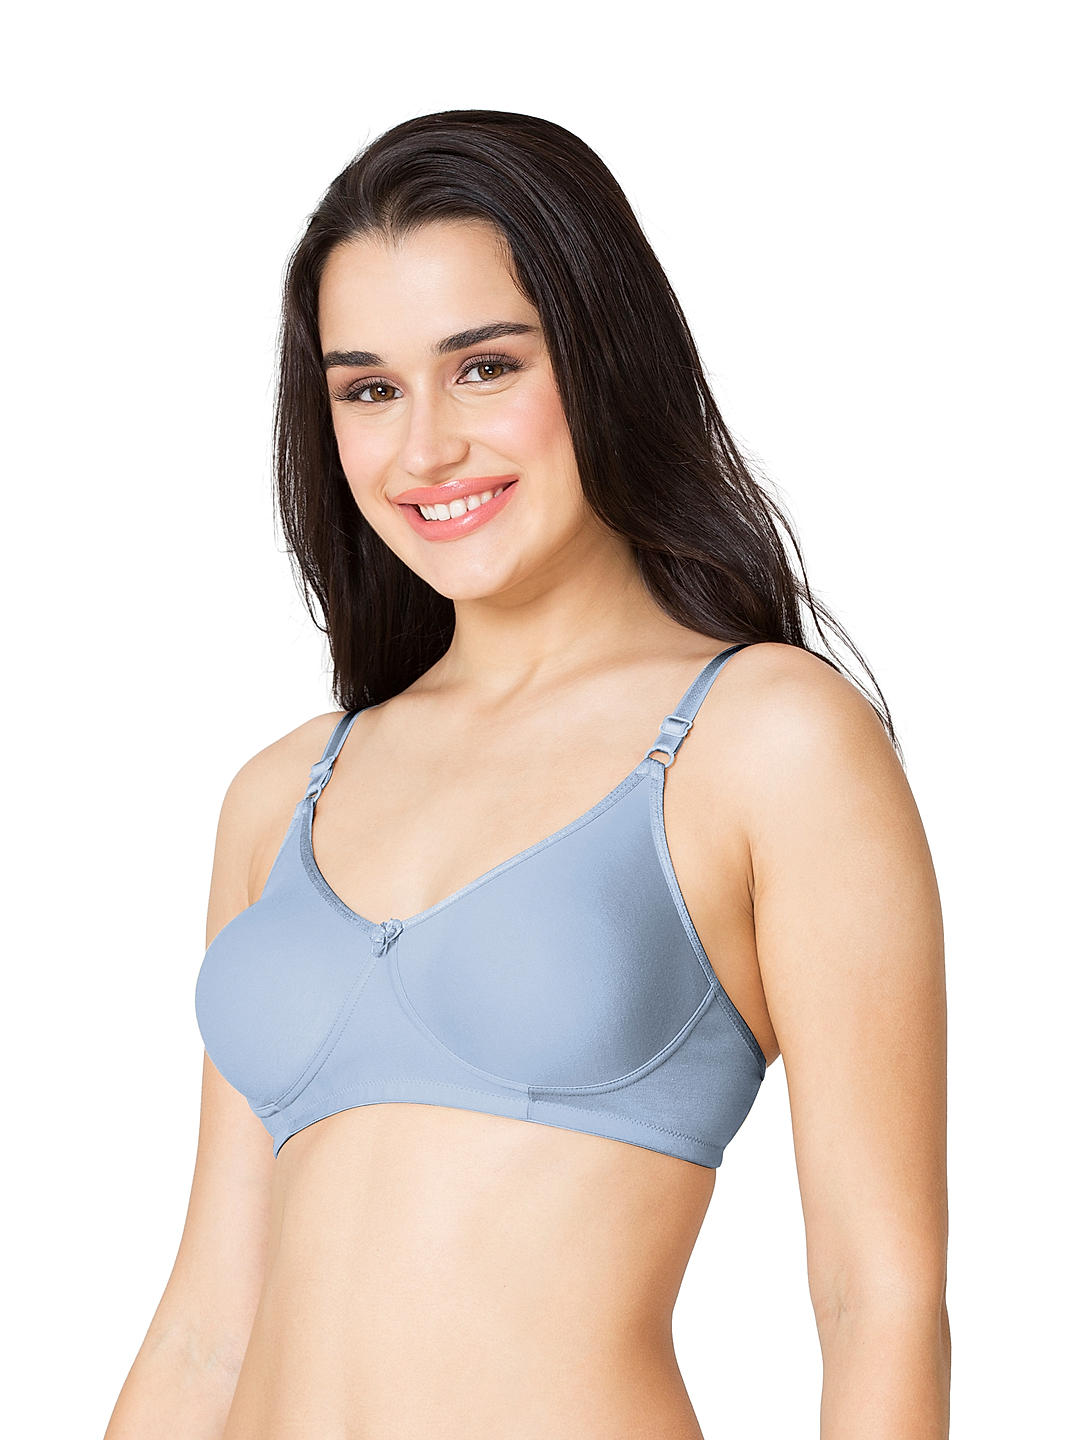 Double Layered Moulded Bra